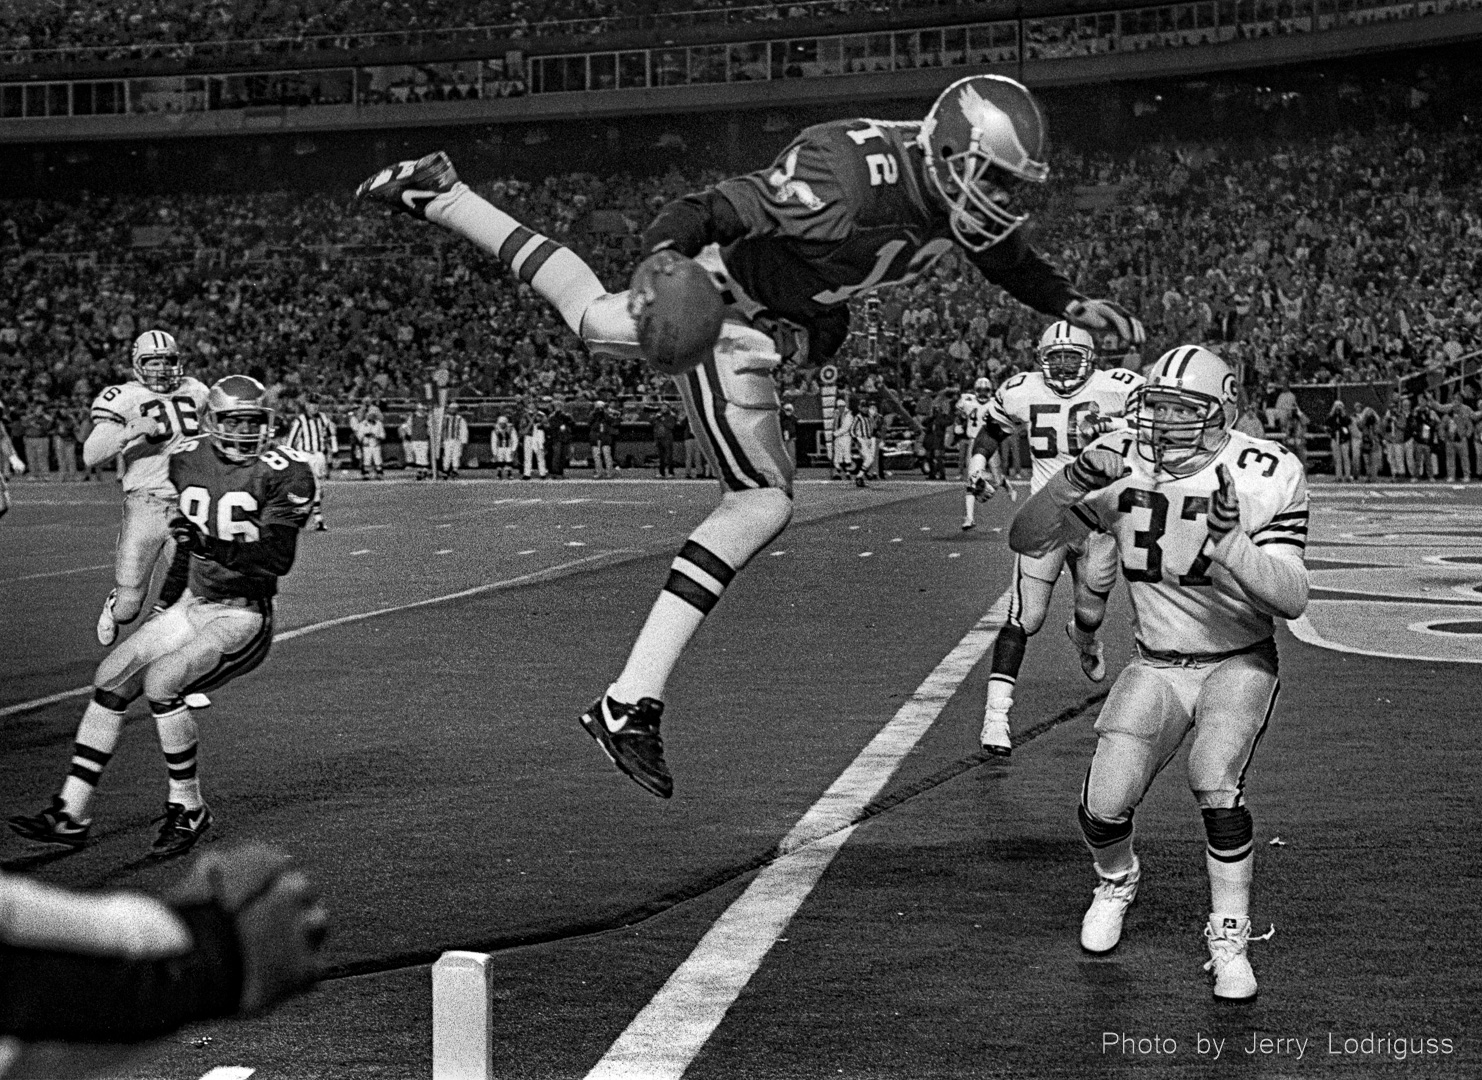 Philadelphia Eagles quarterback Randall Cunningham flies through the air on the way to a touchdown against the Green Bay Packers on December 16, 1990 at Veterans Stadium in Philadelphia.